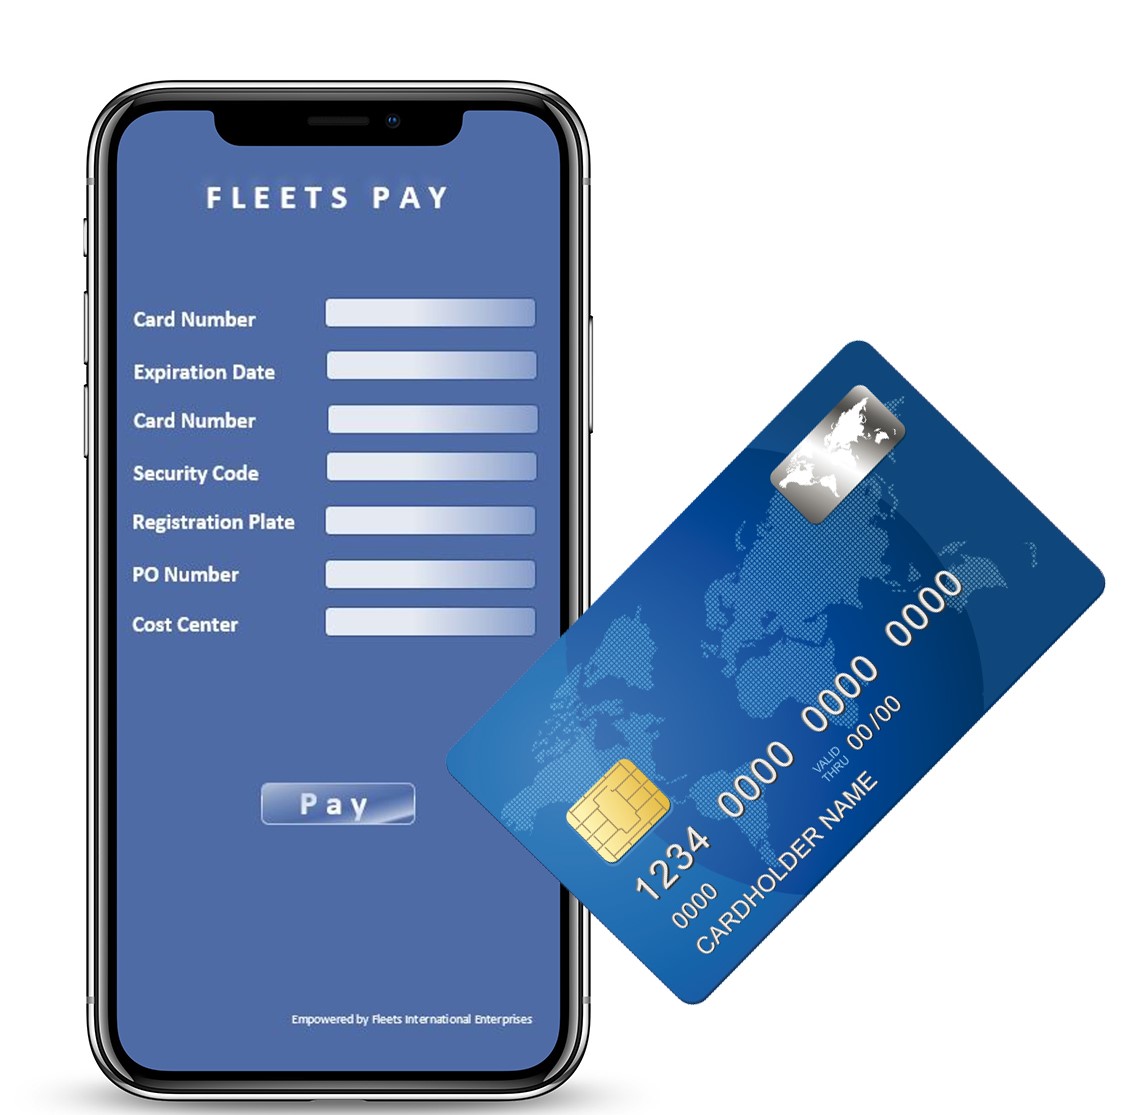 FIE Mobily Payment Solution